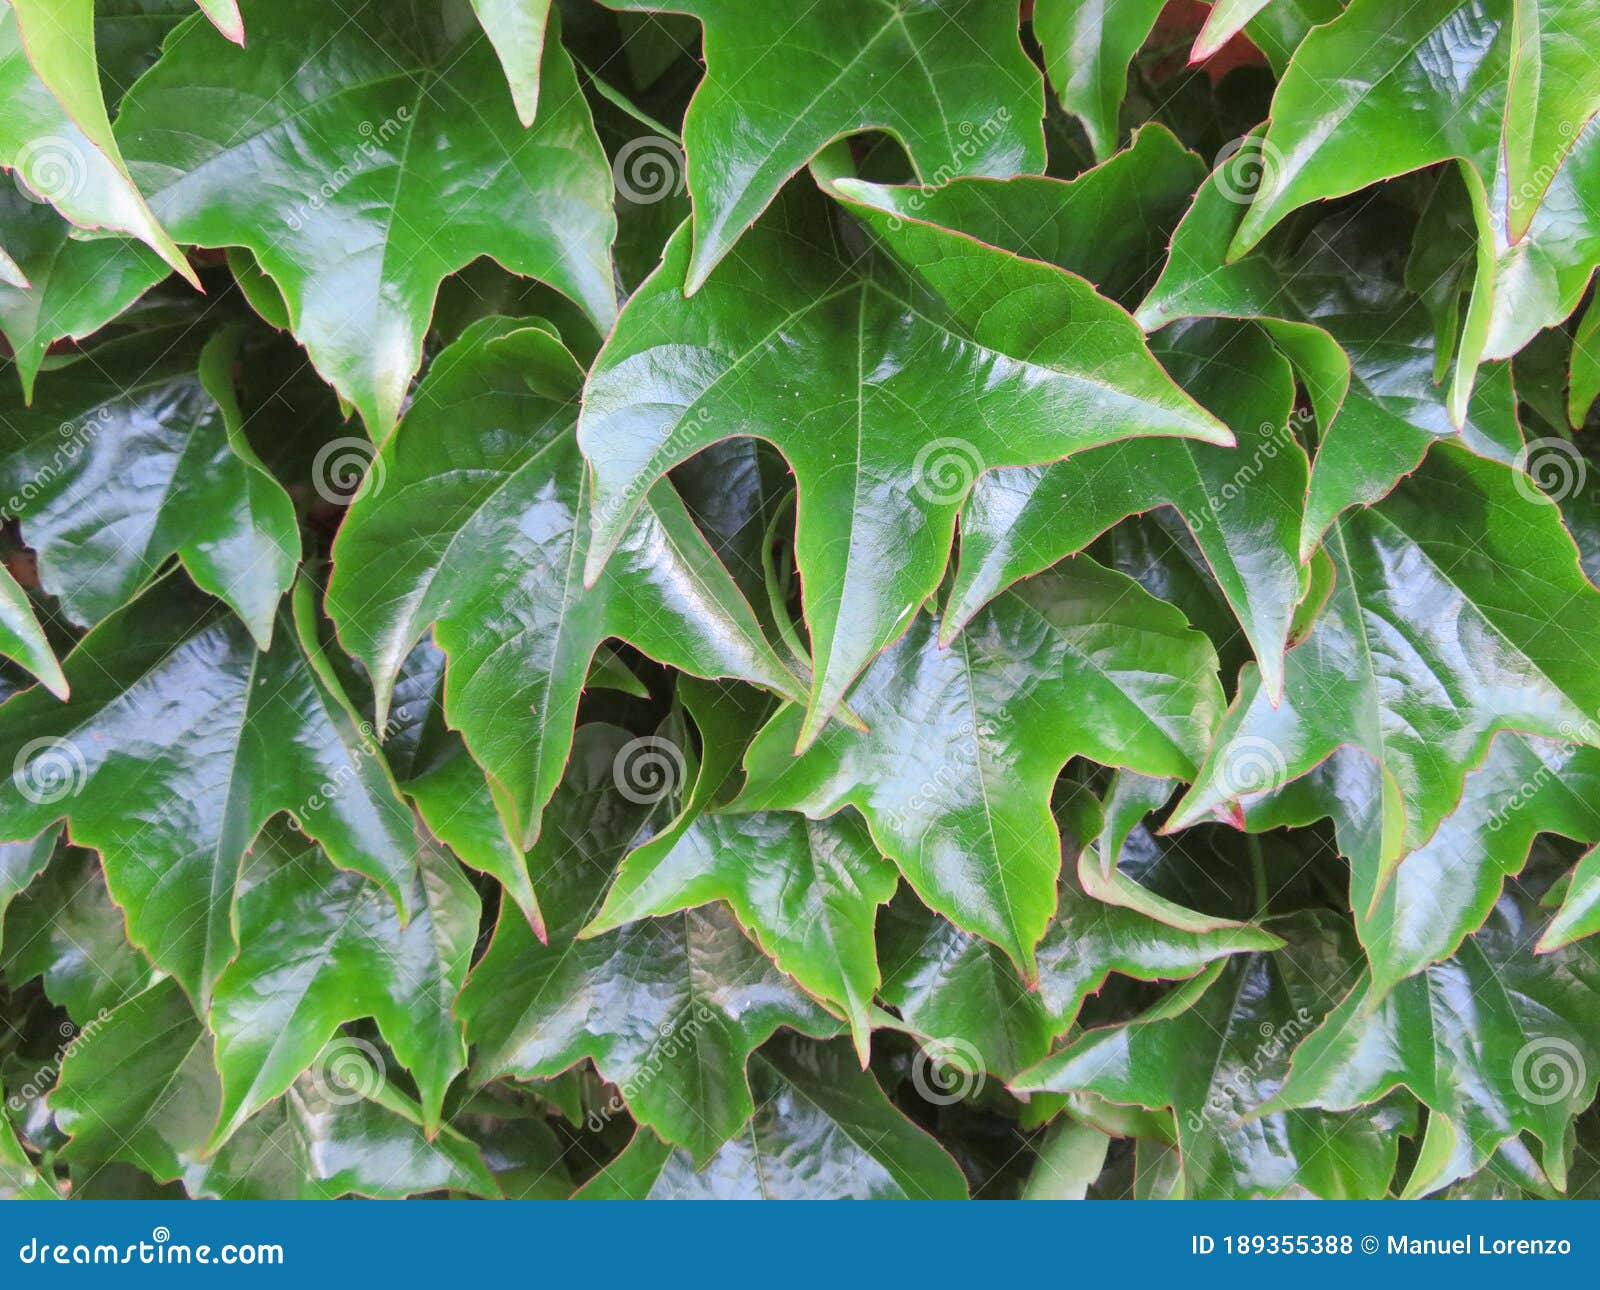 ivy leaves green protection barrier beautiful natural intimacy